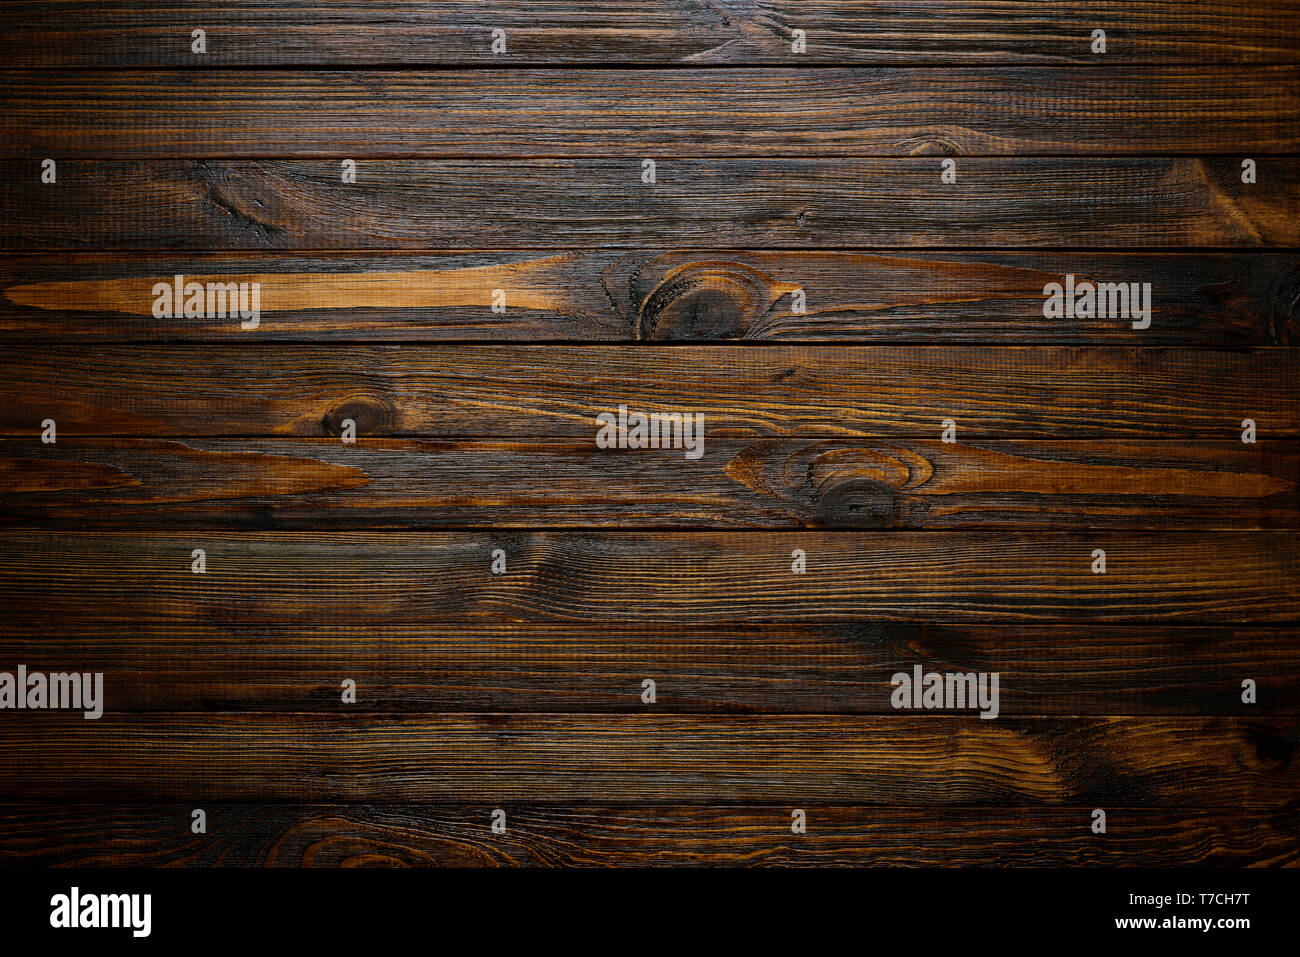 Natural wood texture. Wood background. Dark rustic planks table top flat lay view. Stock Photo